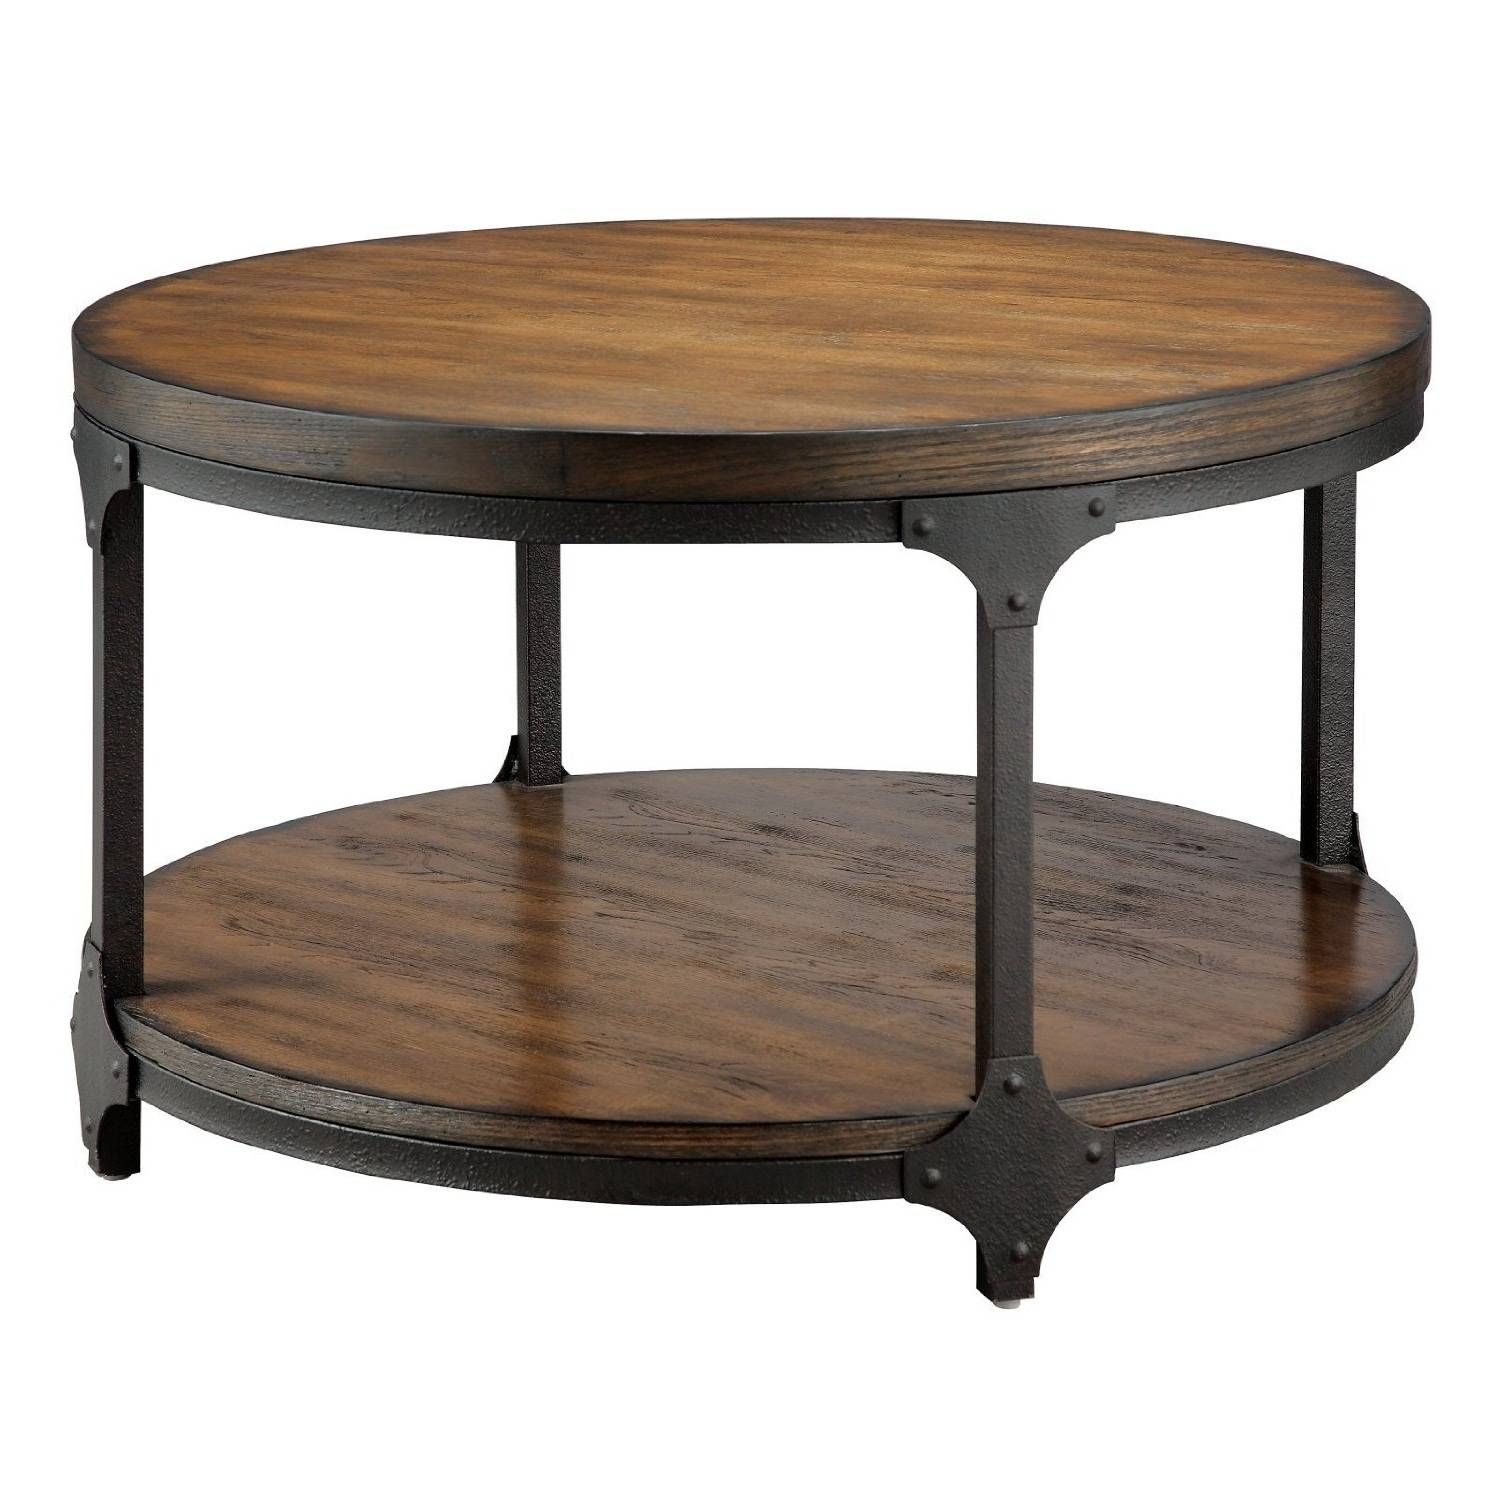 Popular Of Corner Coffee Table With Round Corner Coffee Table Throughout Coffee Table Rounded Corners (View 27 of 30)